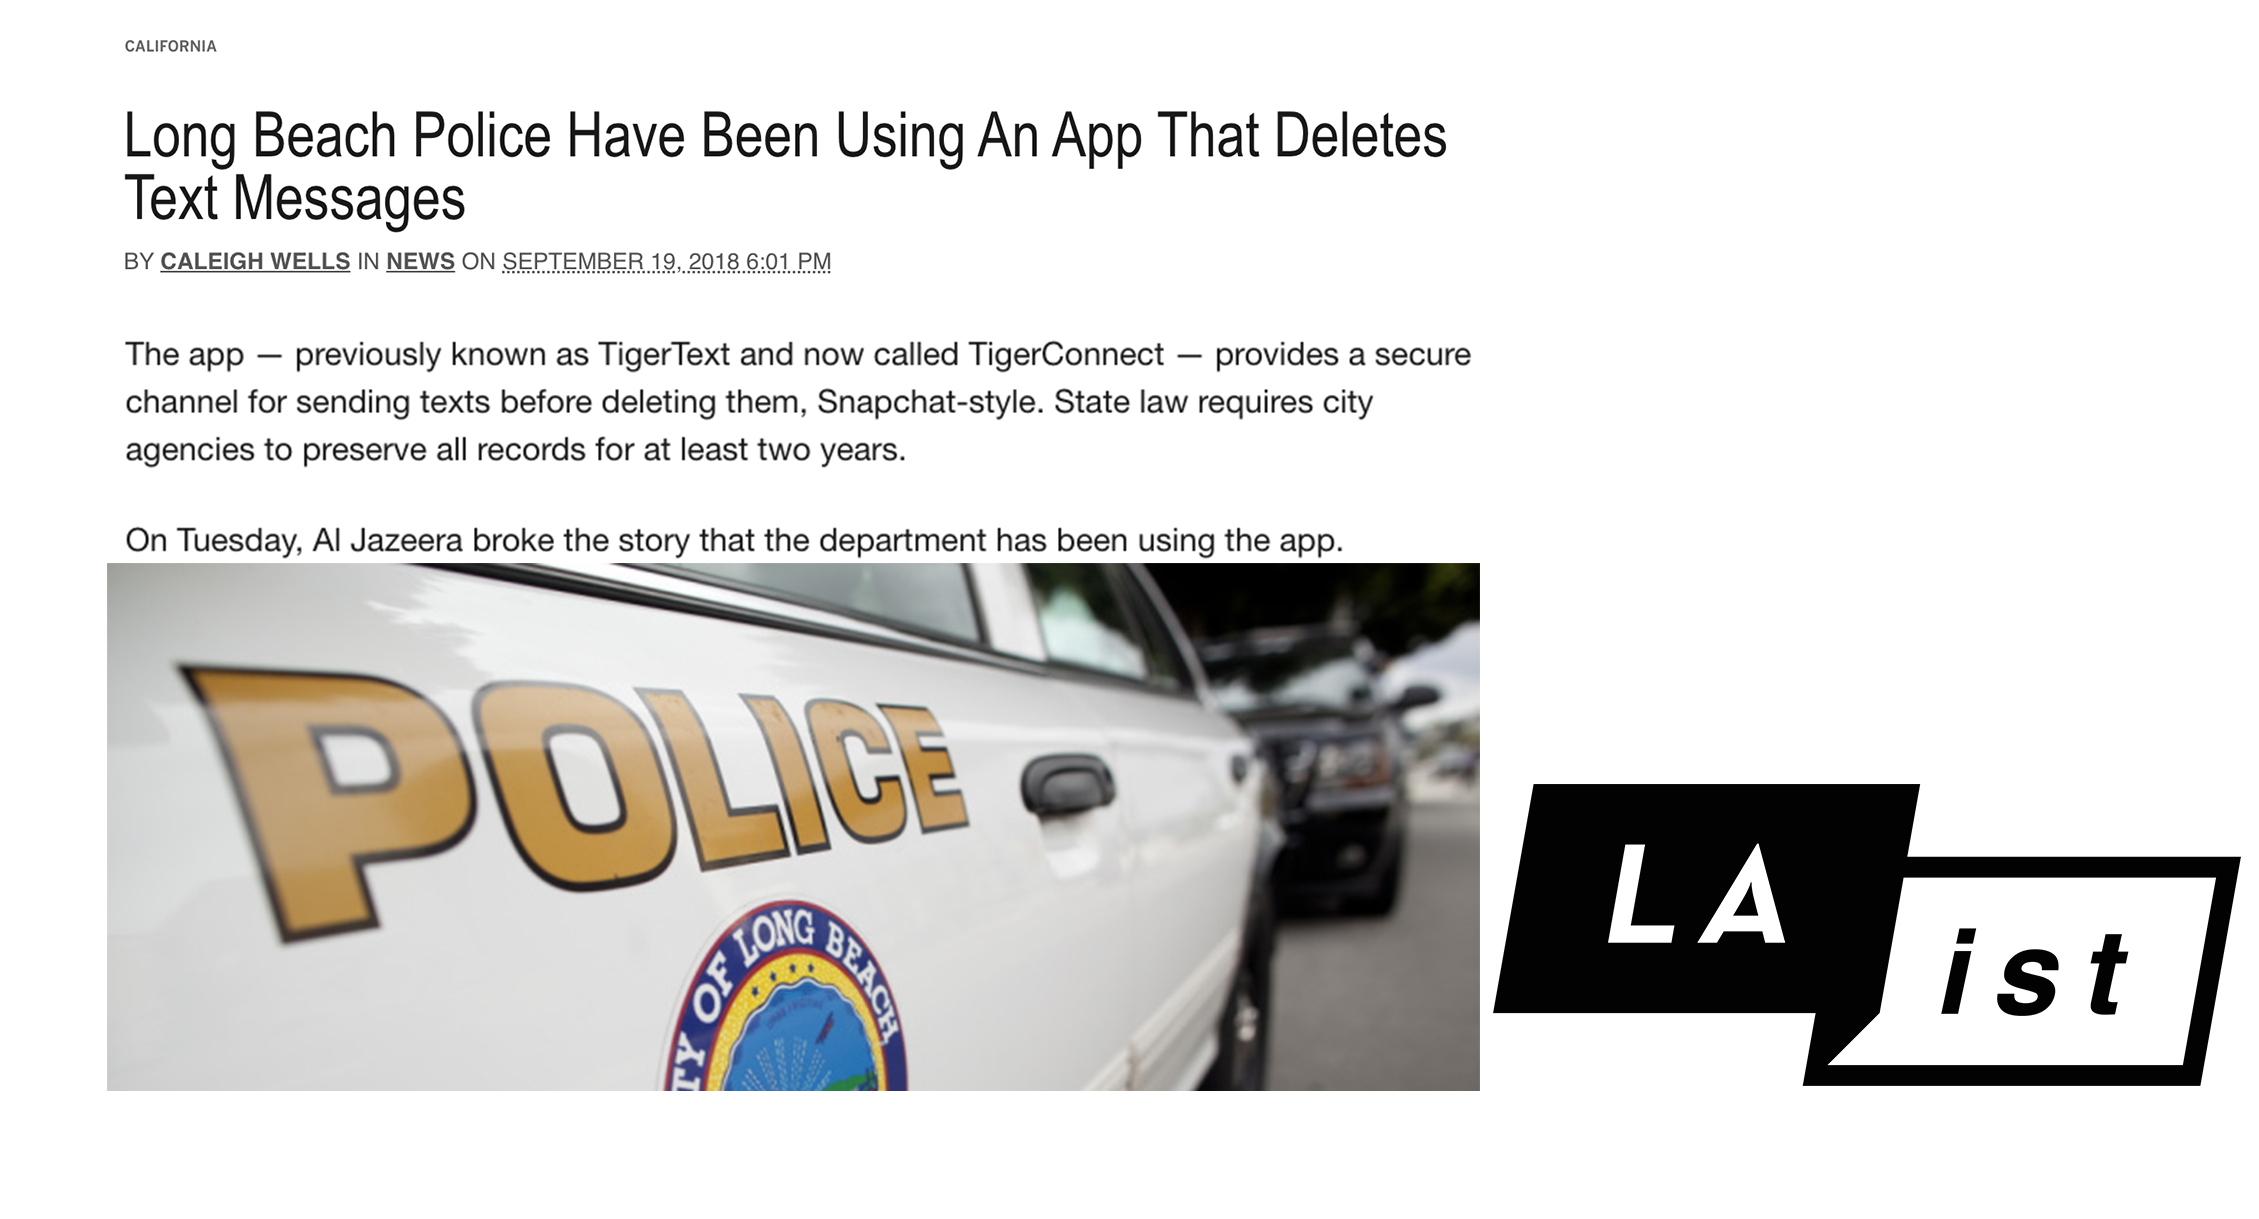 Long Beach Police Have Been Using An App That Deletes Text Messages